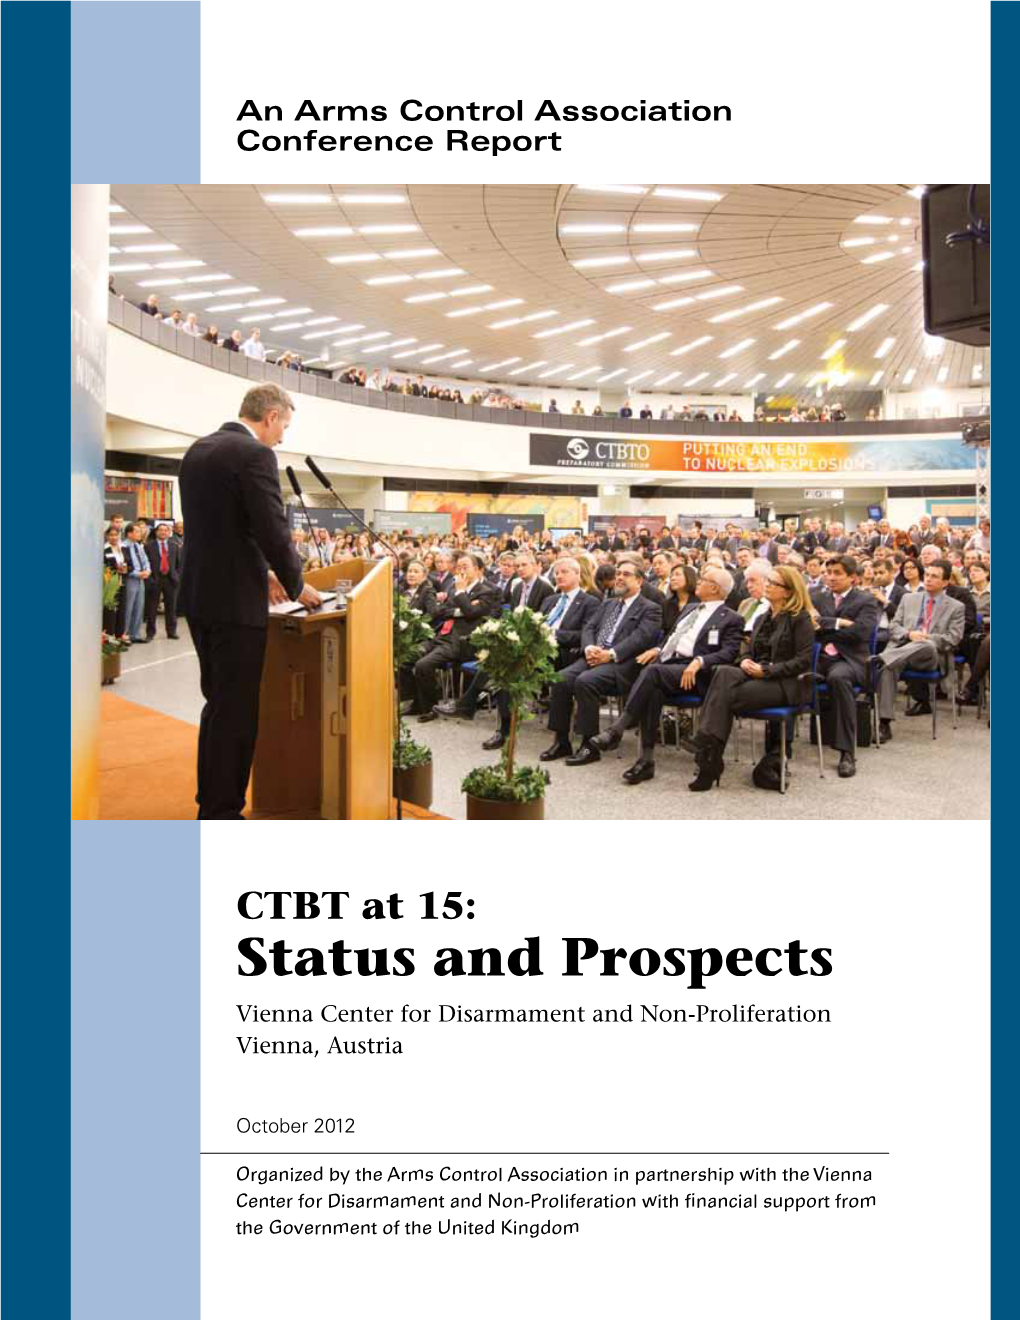 CTBT at 15: Status and Prospects Vienna Center for Disarmament and Non-Proliferation Vienna, Austria